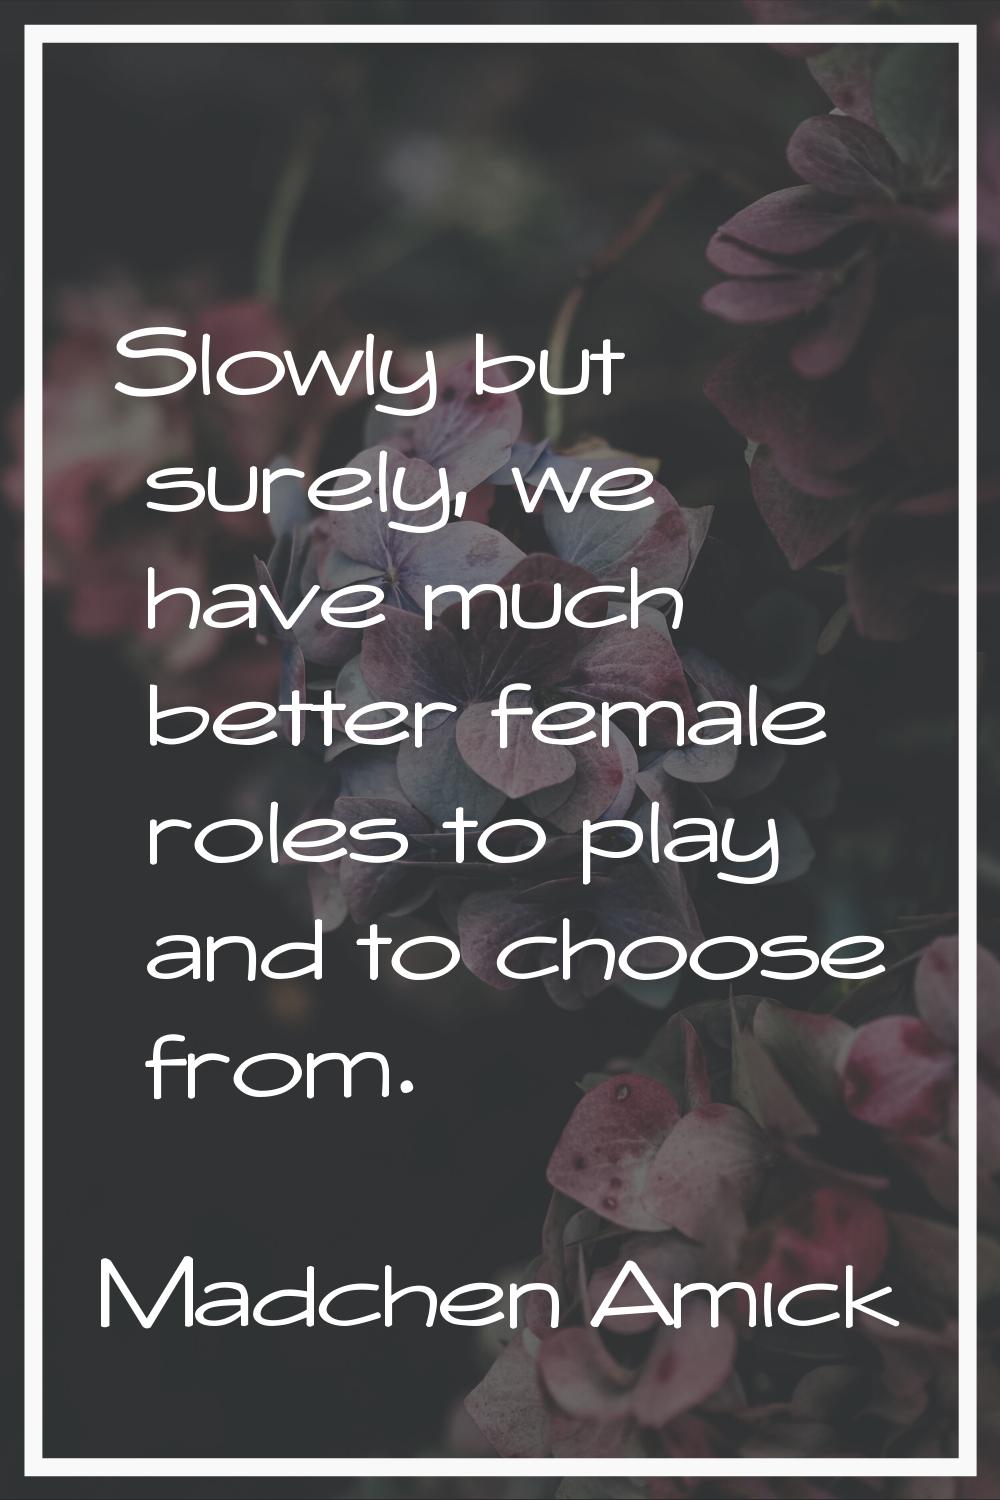 Slowly but surely, we have much better female roles to play and to choose from.